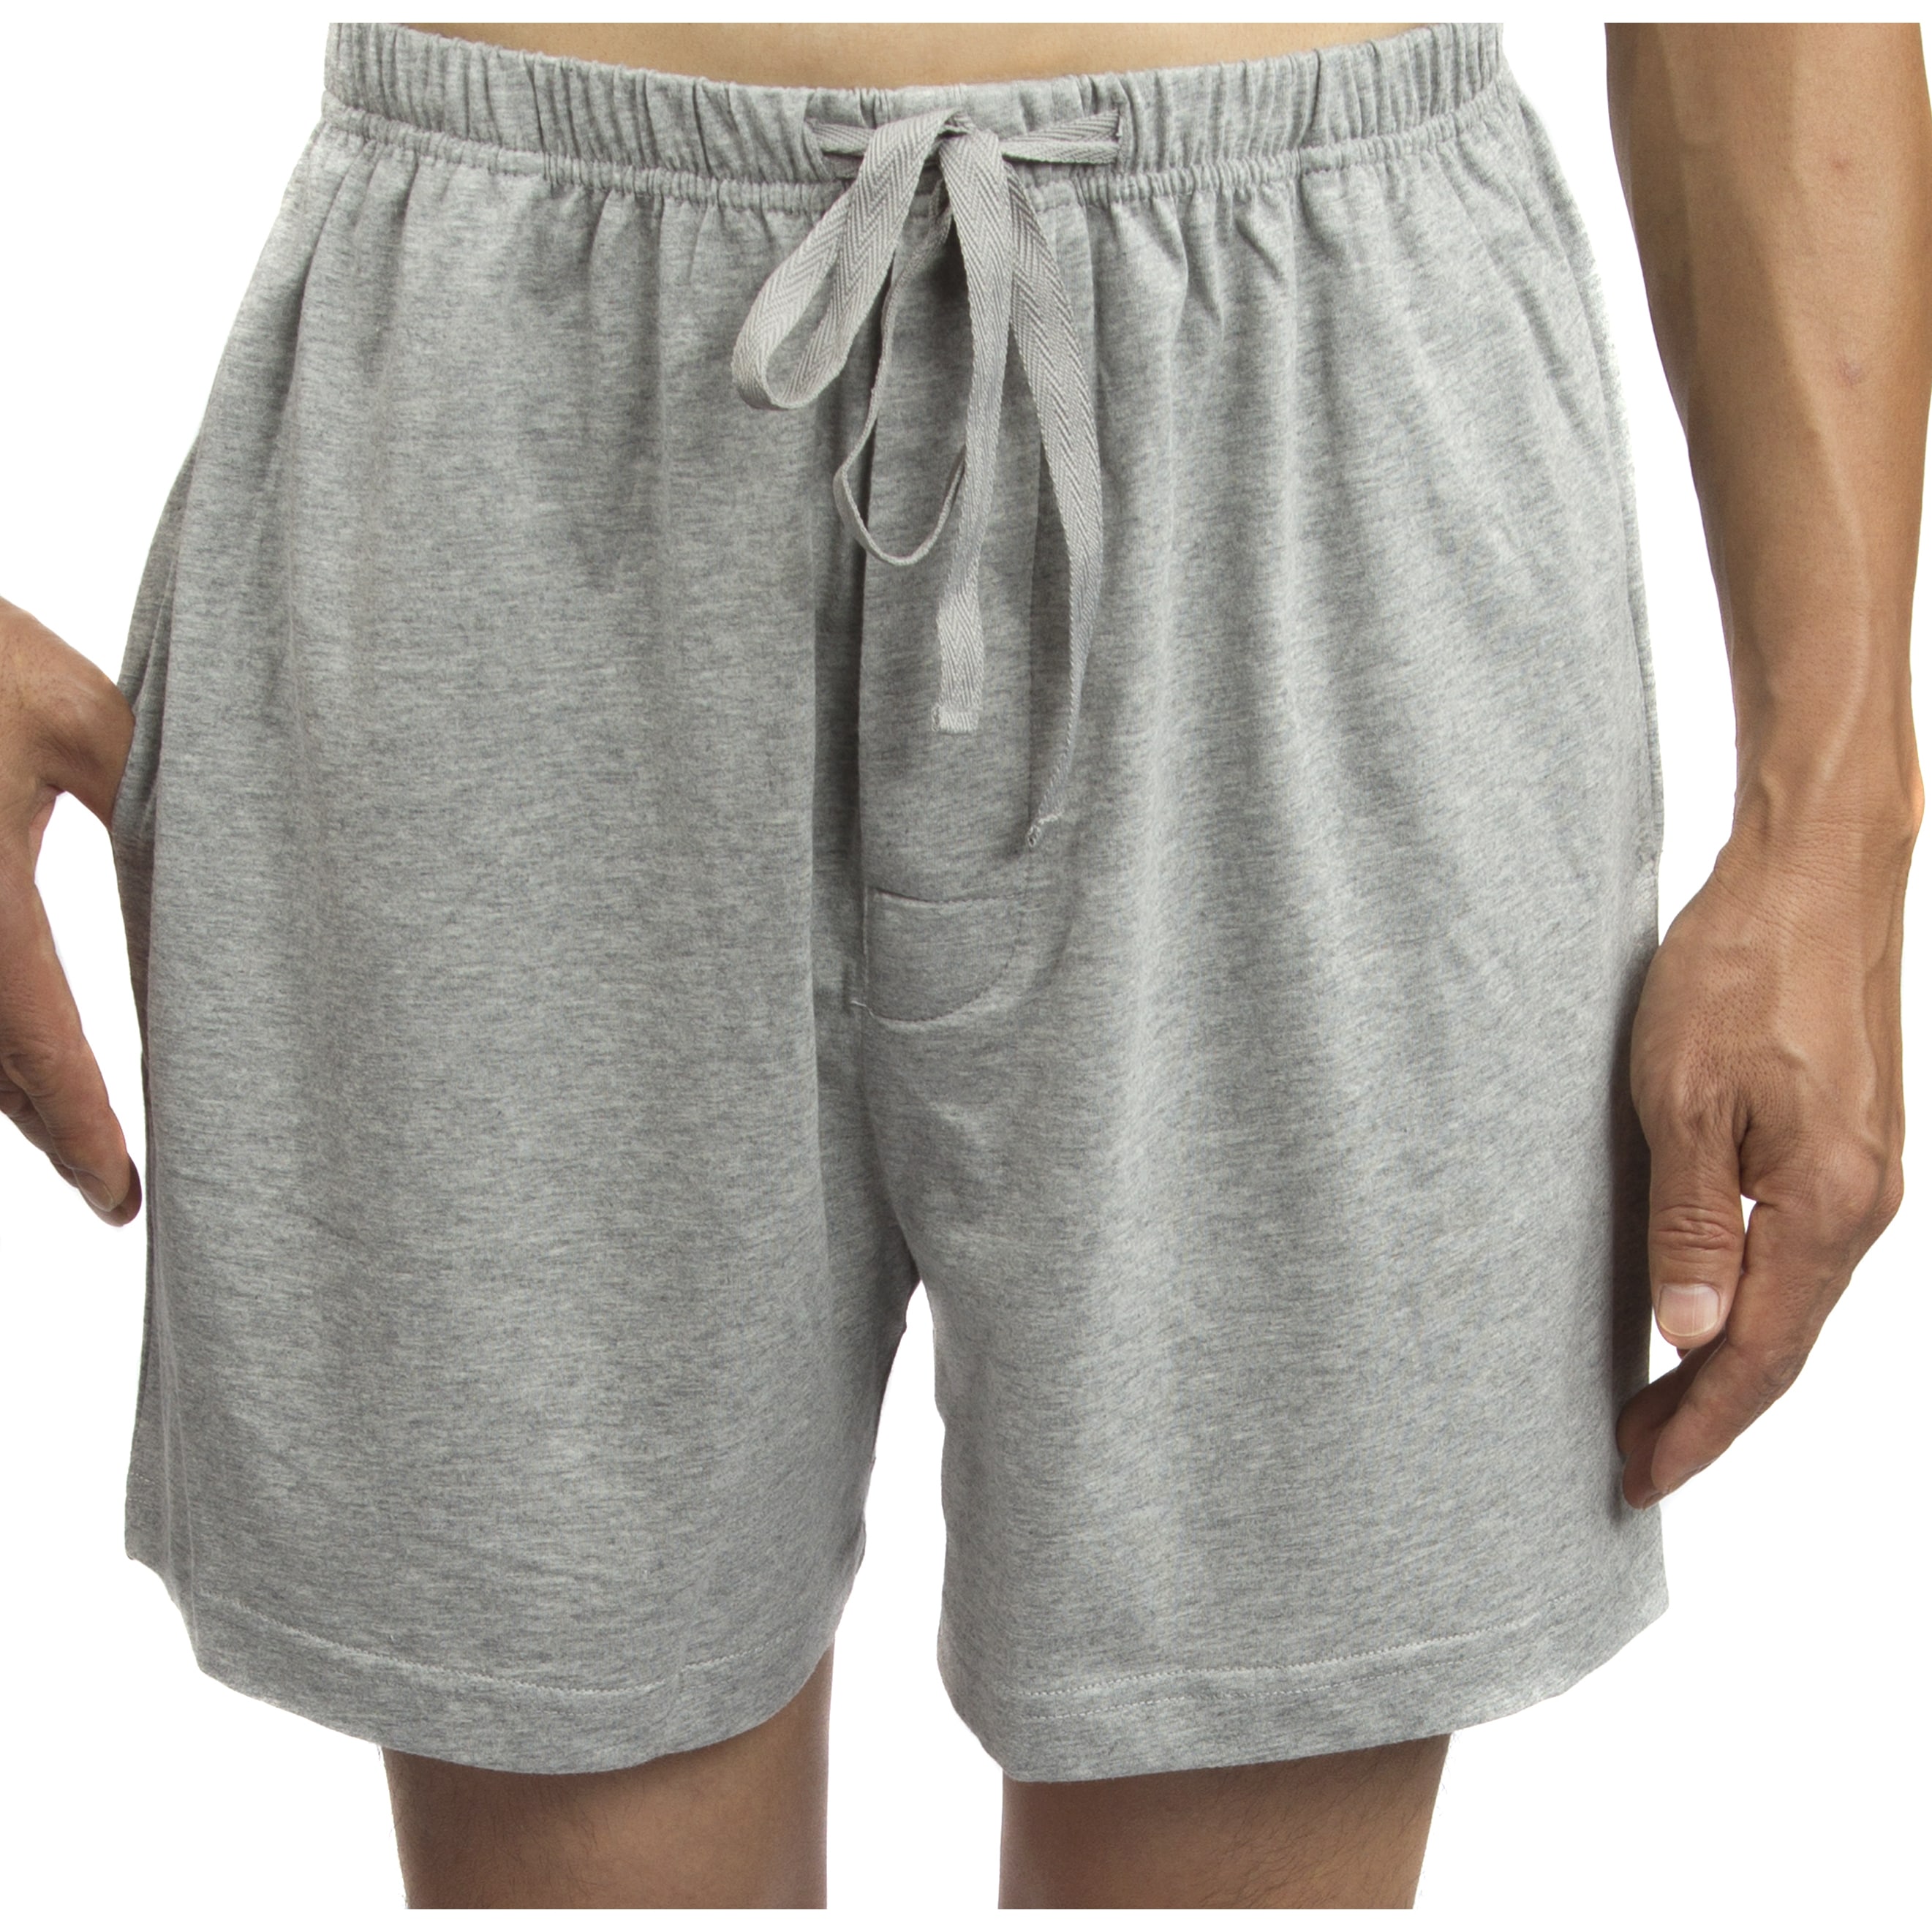 men's cotton jersey shorts with pockets